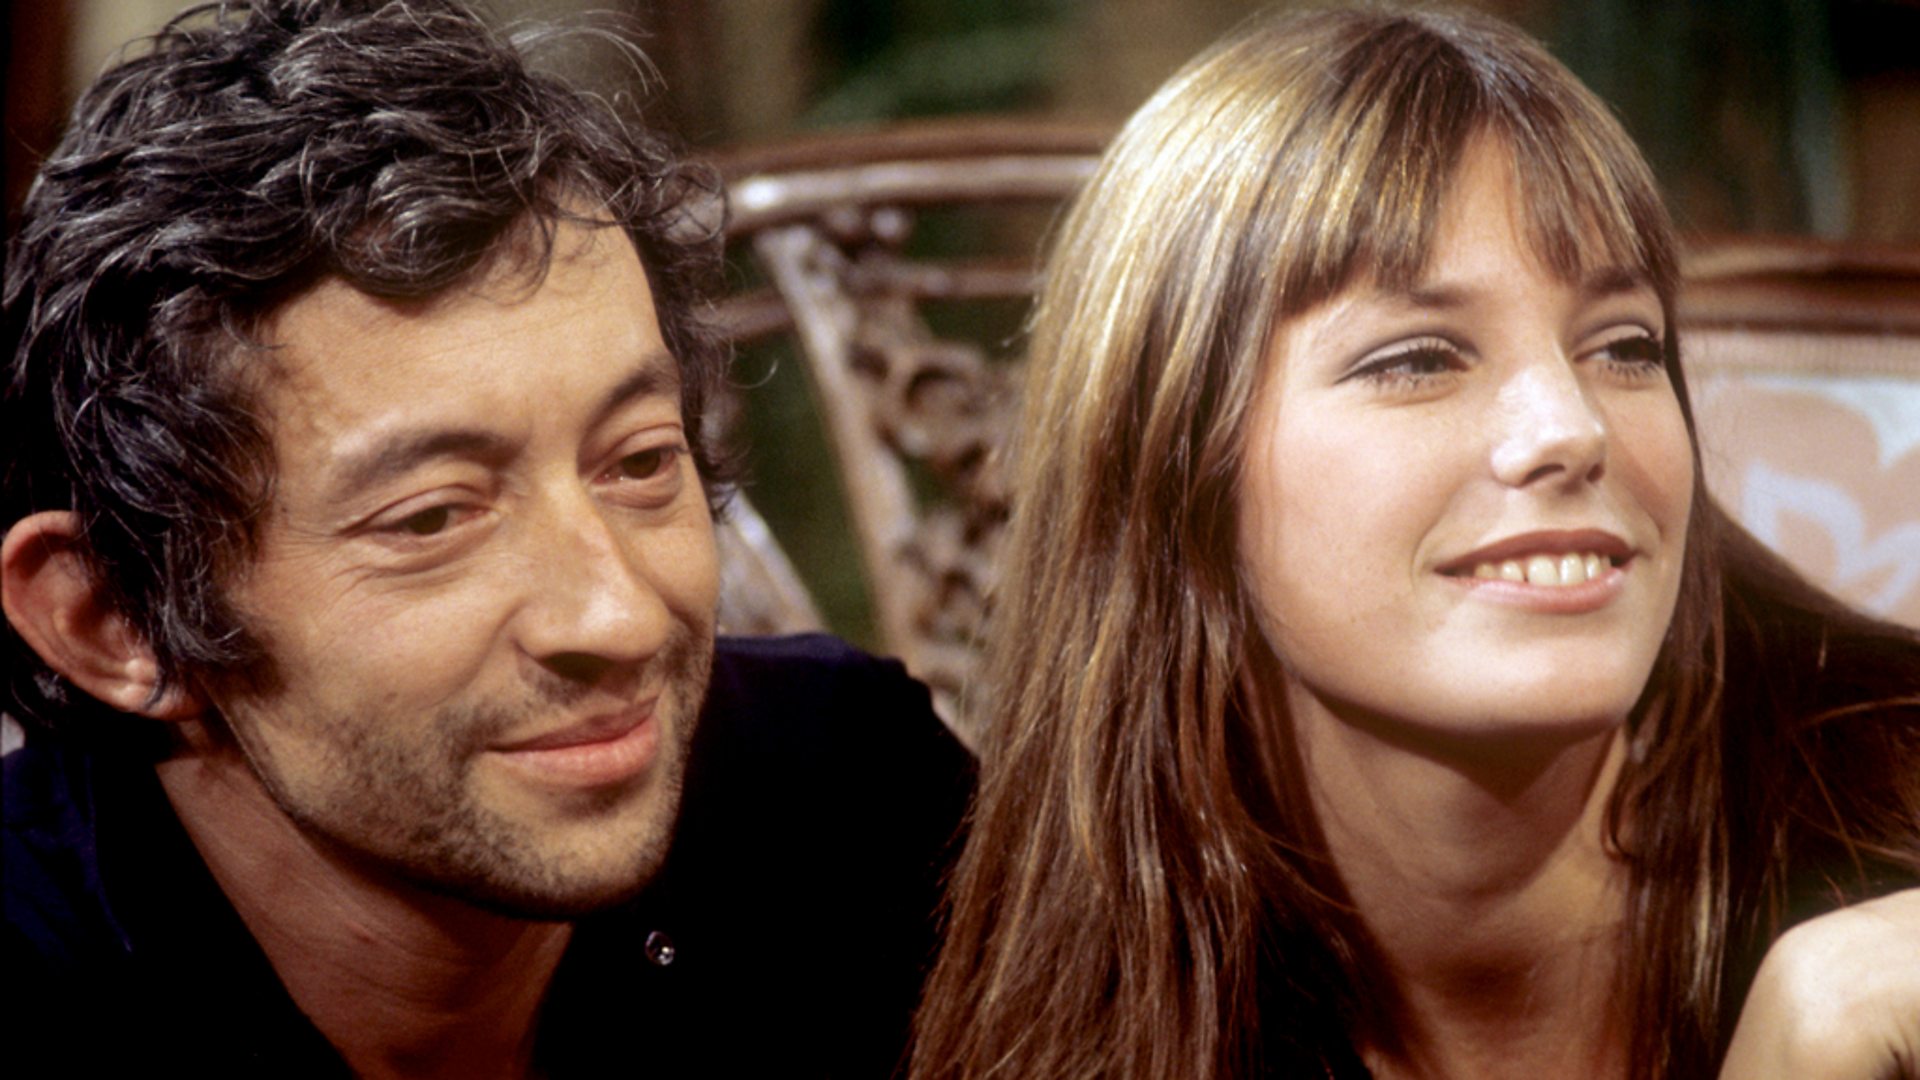 Jane Birkin on the truth about Serge Gainsbourg and the pain of